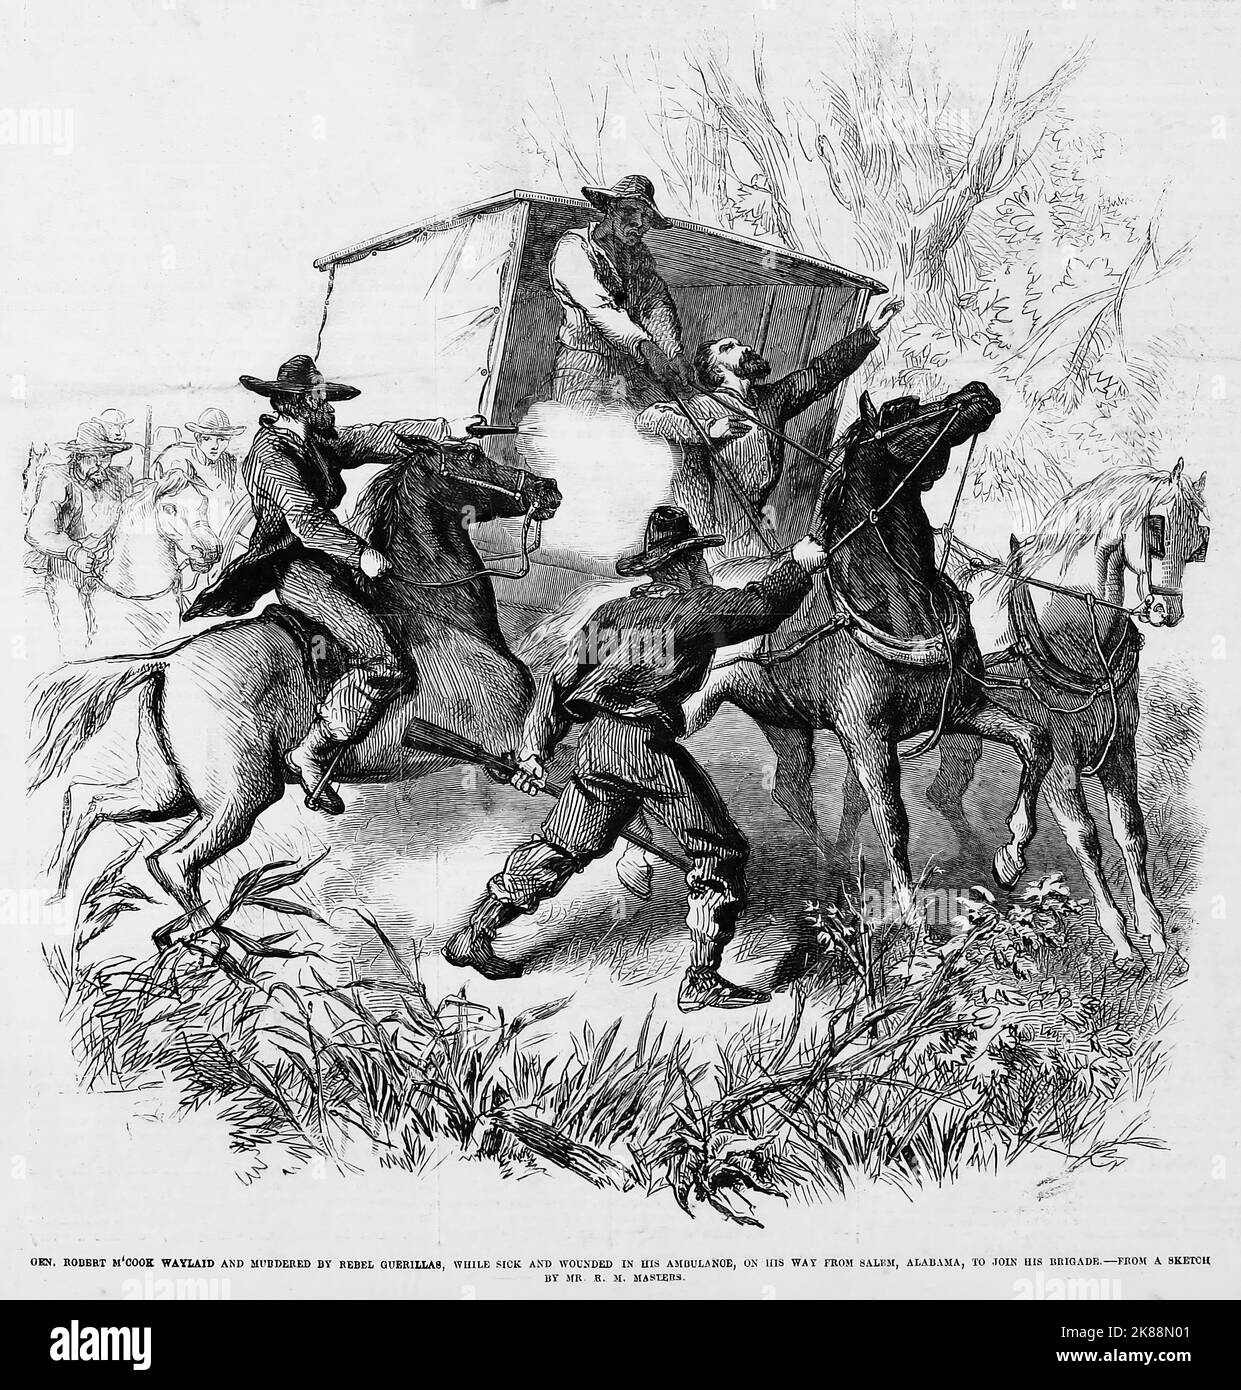 General Robert Latimer McCook waylaid and murdered by Rebel guerillas, while sick and wounded in his ambulance, on his way from Salem, Alabama, to join his brigade. August 6th, 1862. 19th century American Civil War illustration from Frank Leslie's Illustrated Newspaper Stock Photo